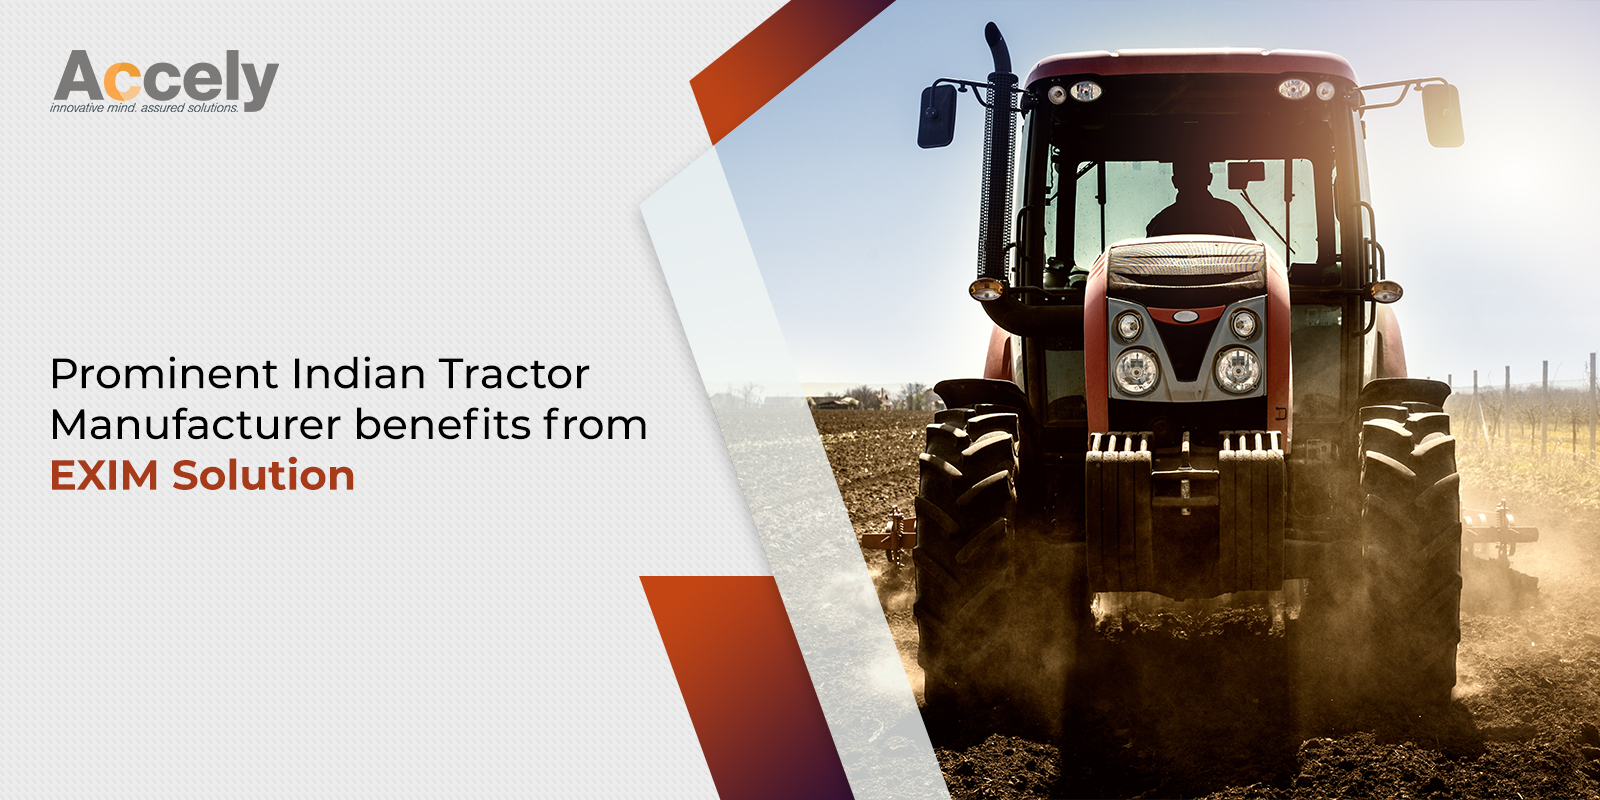 Prominent Indian Tractor Manufacturer benefits from EXIM Solution